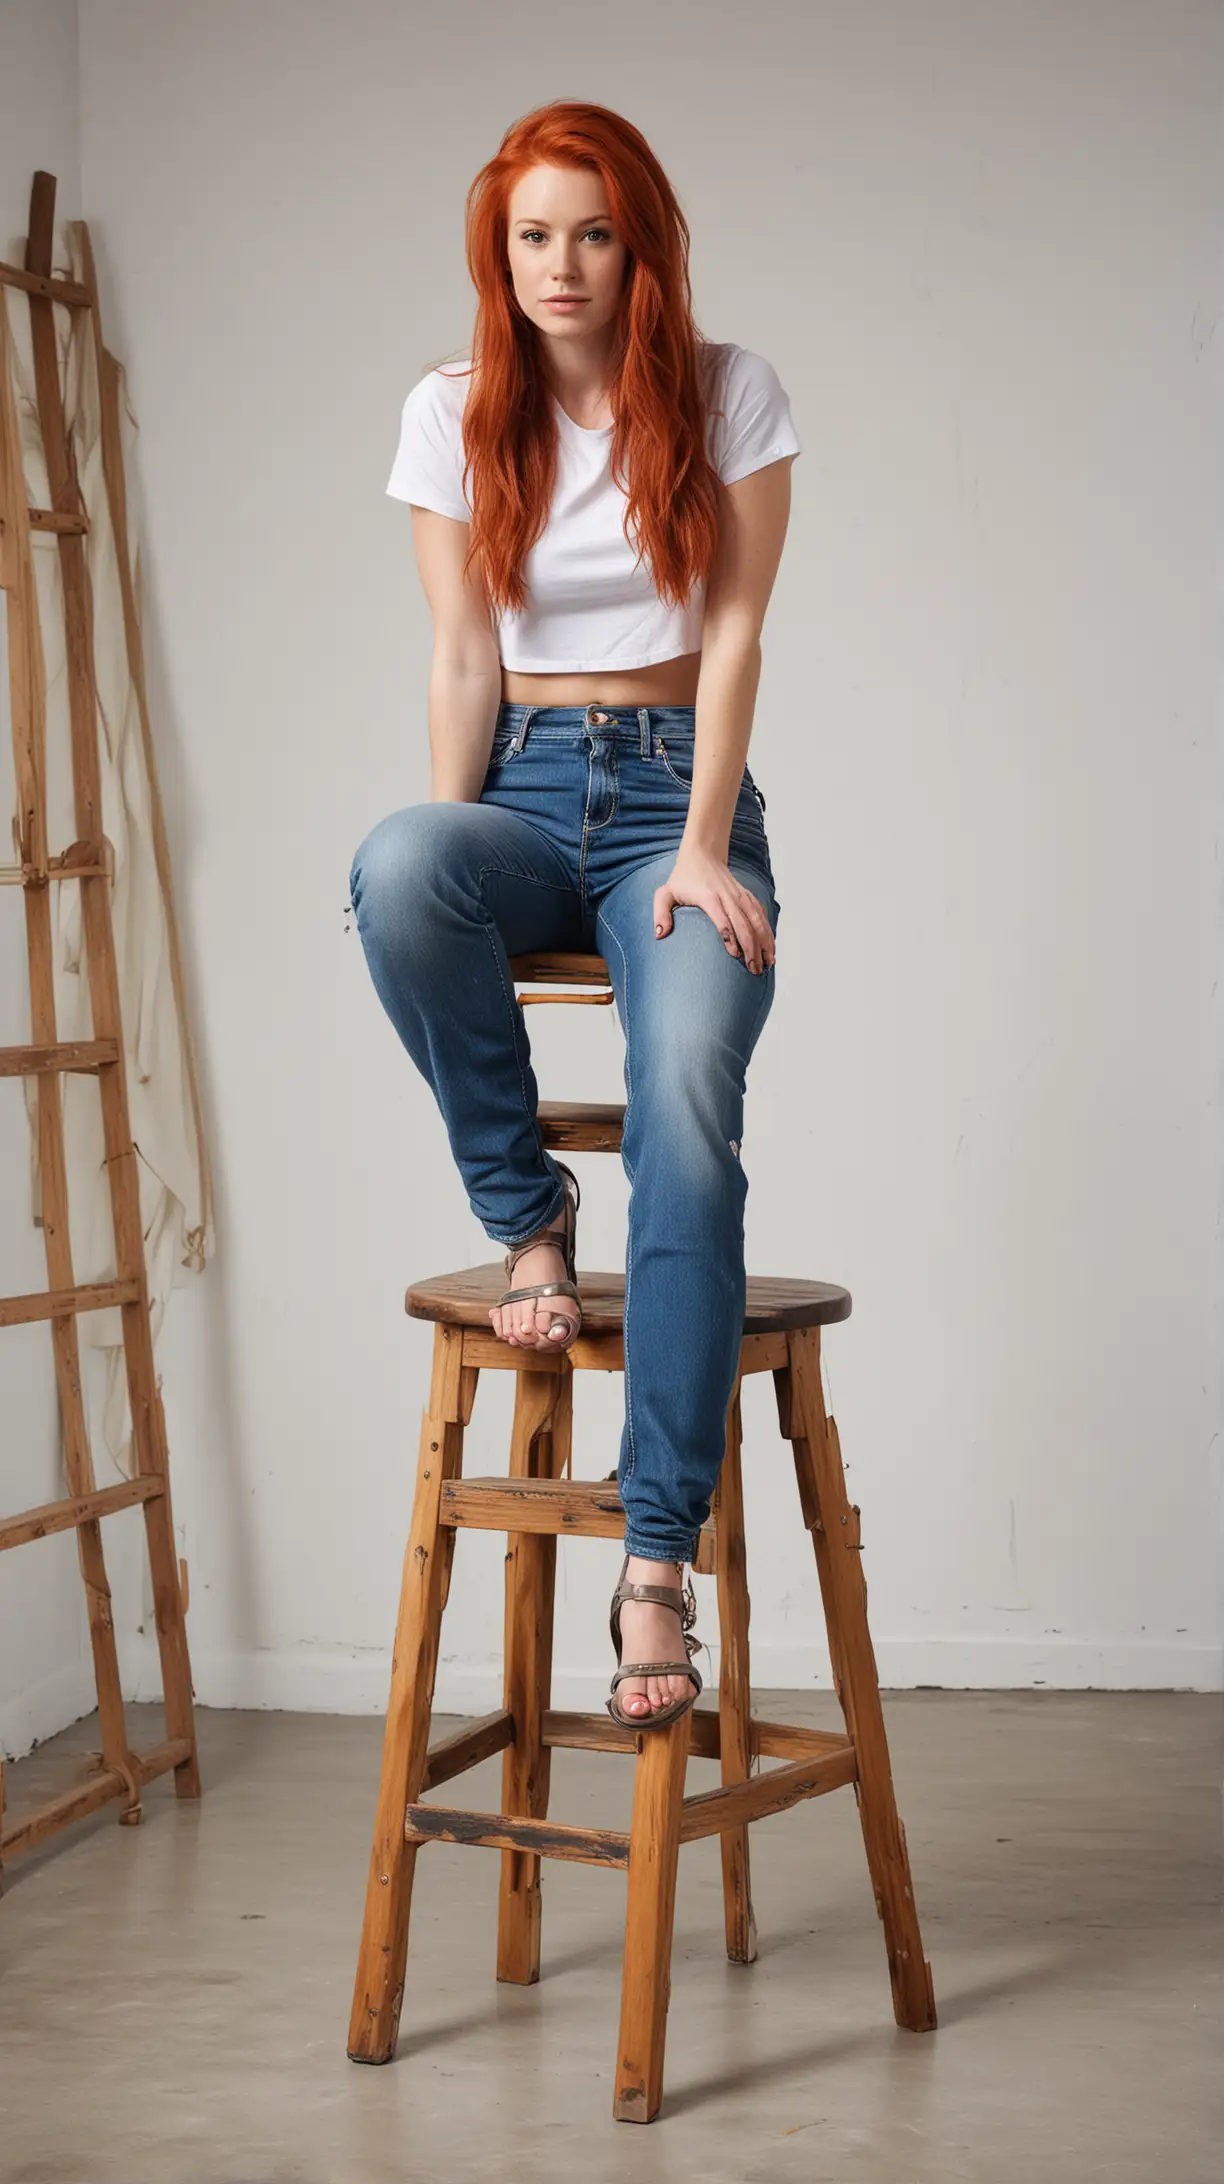 Create a vivid image of a young woman in her thirties with long red hair, dressed in jeans and a crop top, seated on a stool within an empty loft studio with an artistic ambiance. white walls
